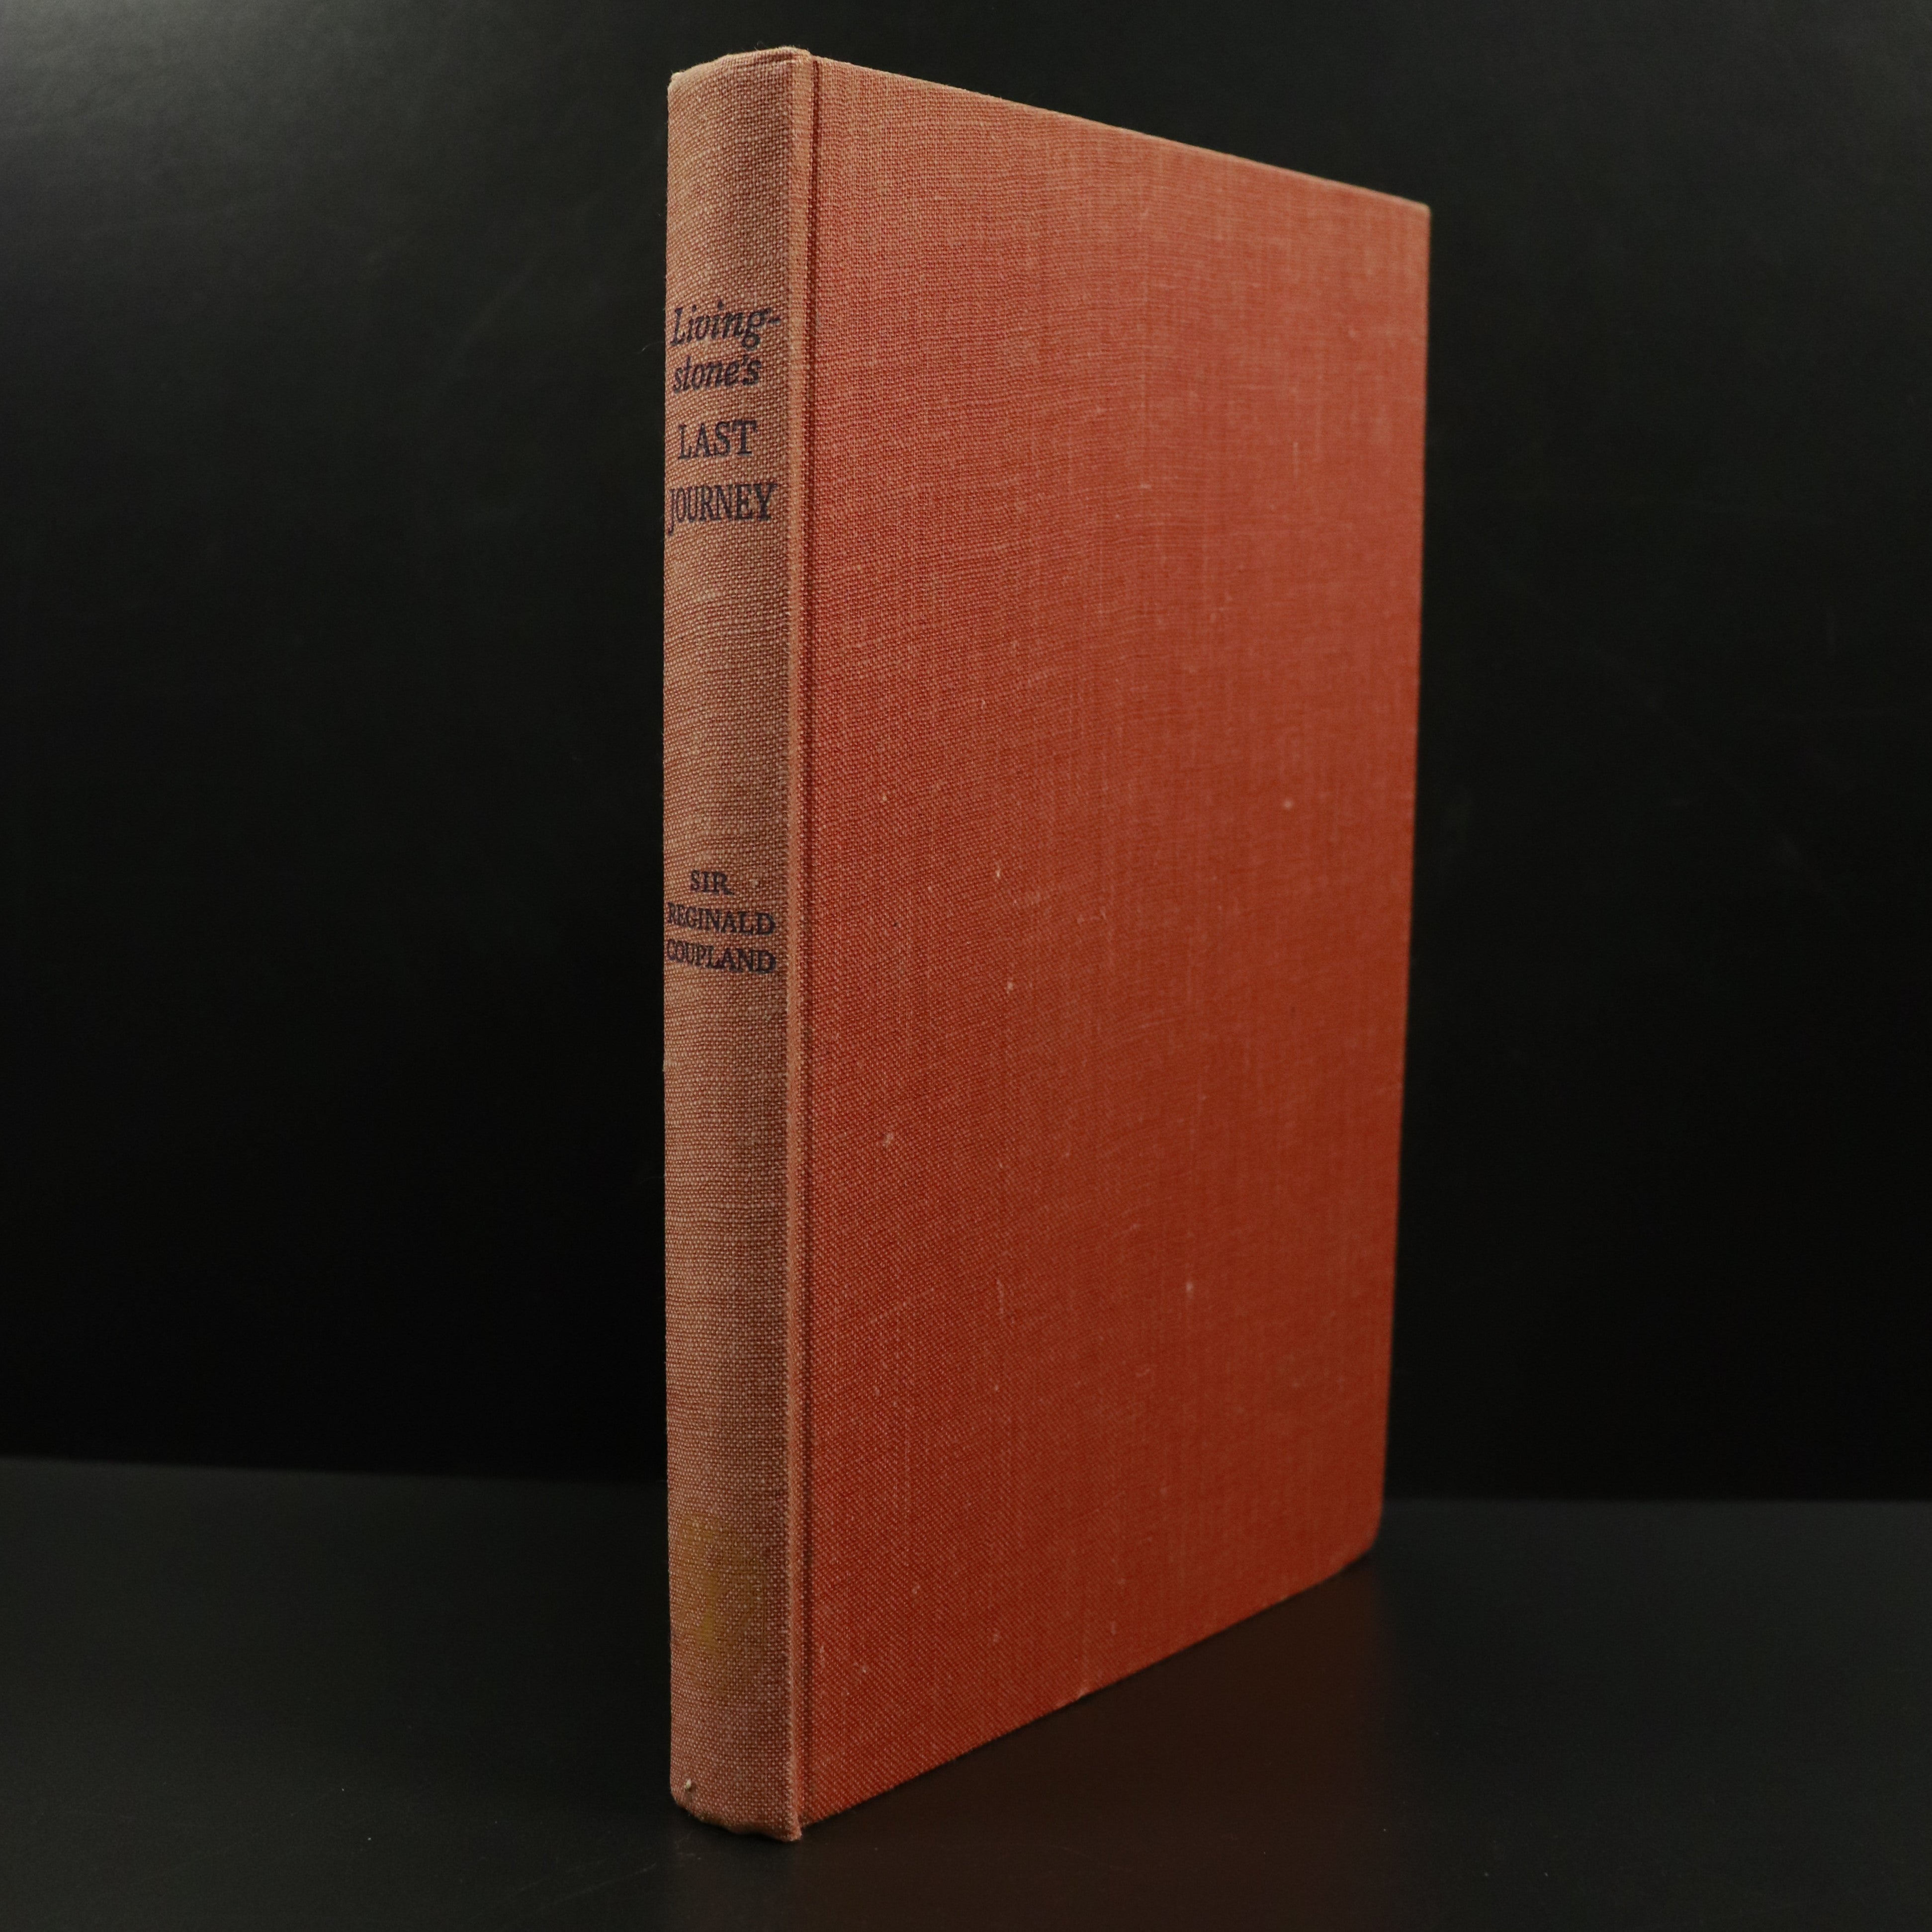 1947 Livingstone's Last Journey by Sir R. Coupland Antique Exploration Book